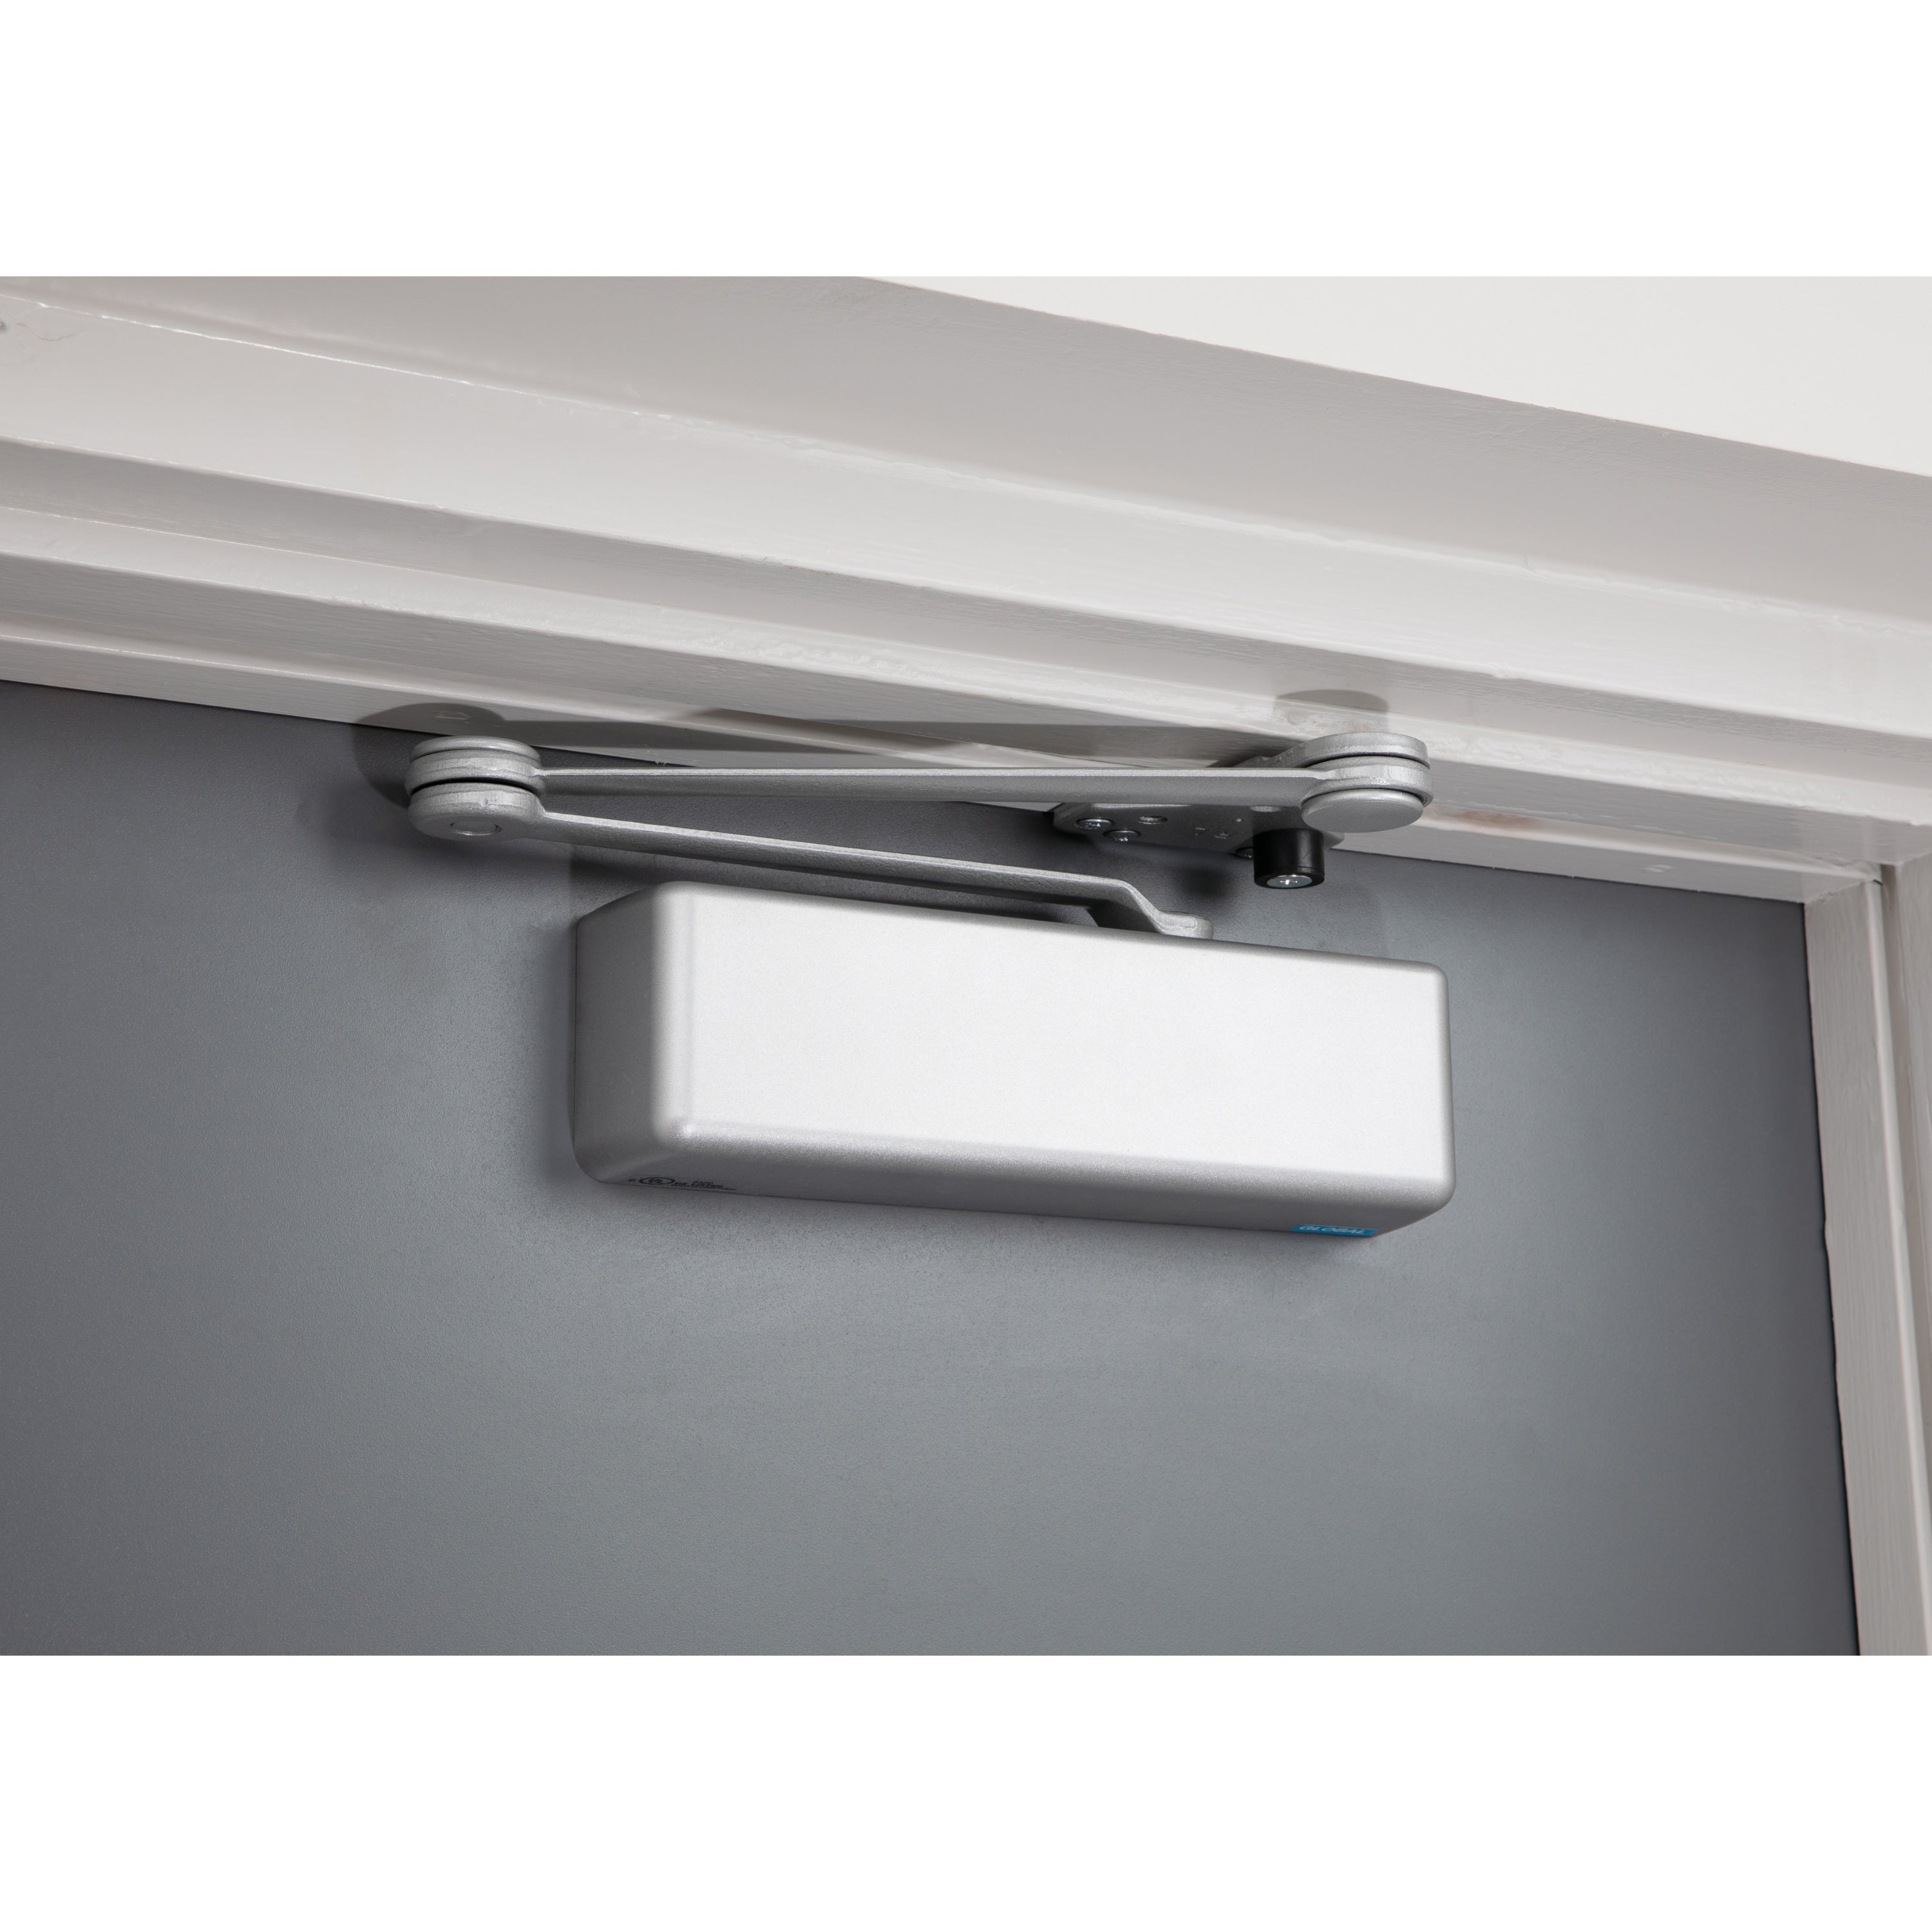 Heavy Duty ADA Commercial Grade 1 Door Closer with Hold Open Cush-N-Stop Arm - Sizes 1-6